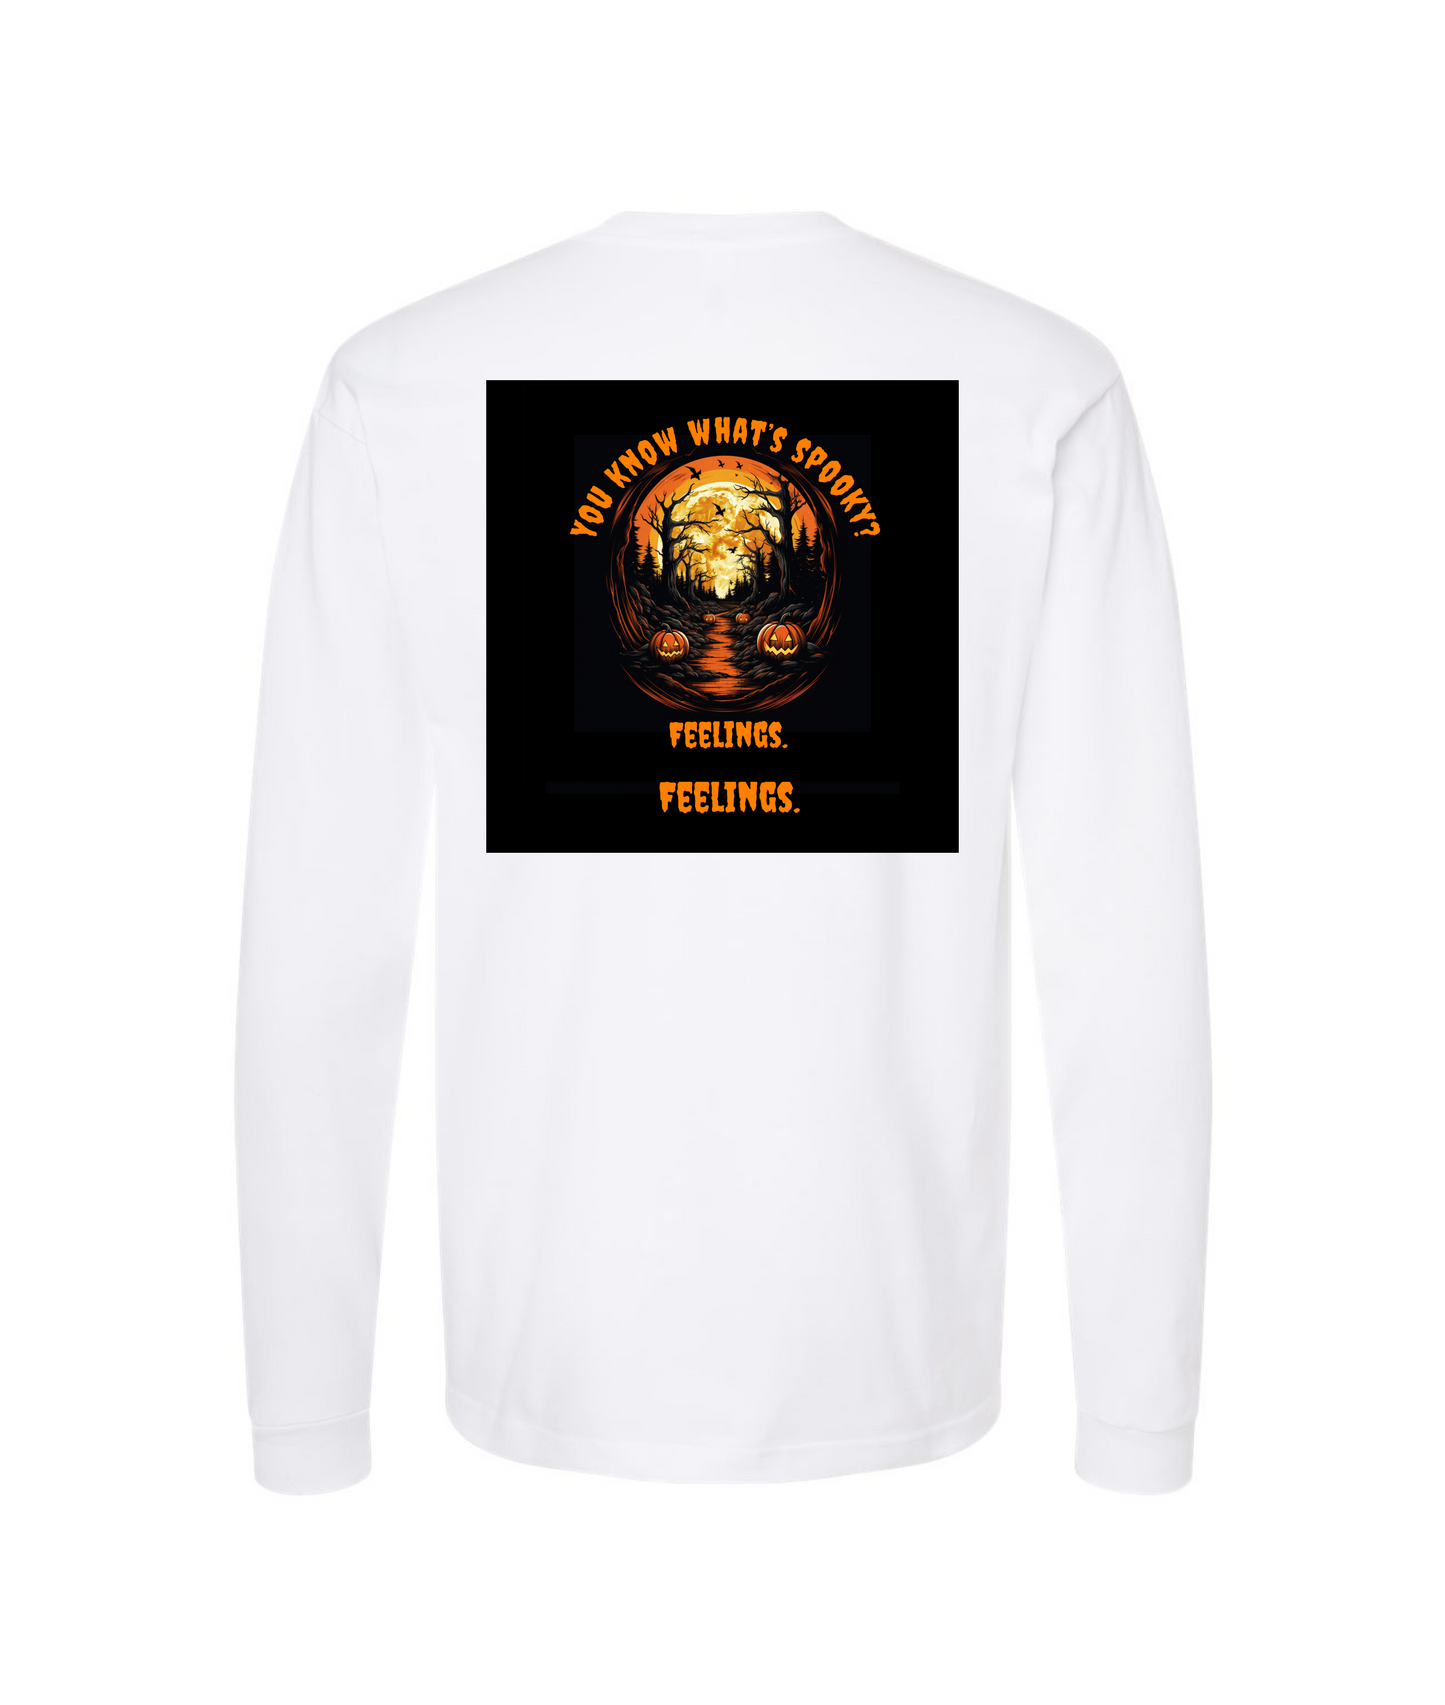 Echo Harbour - You Know What’s Spooky? - White Long Sleeve T